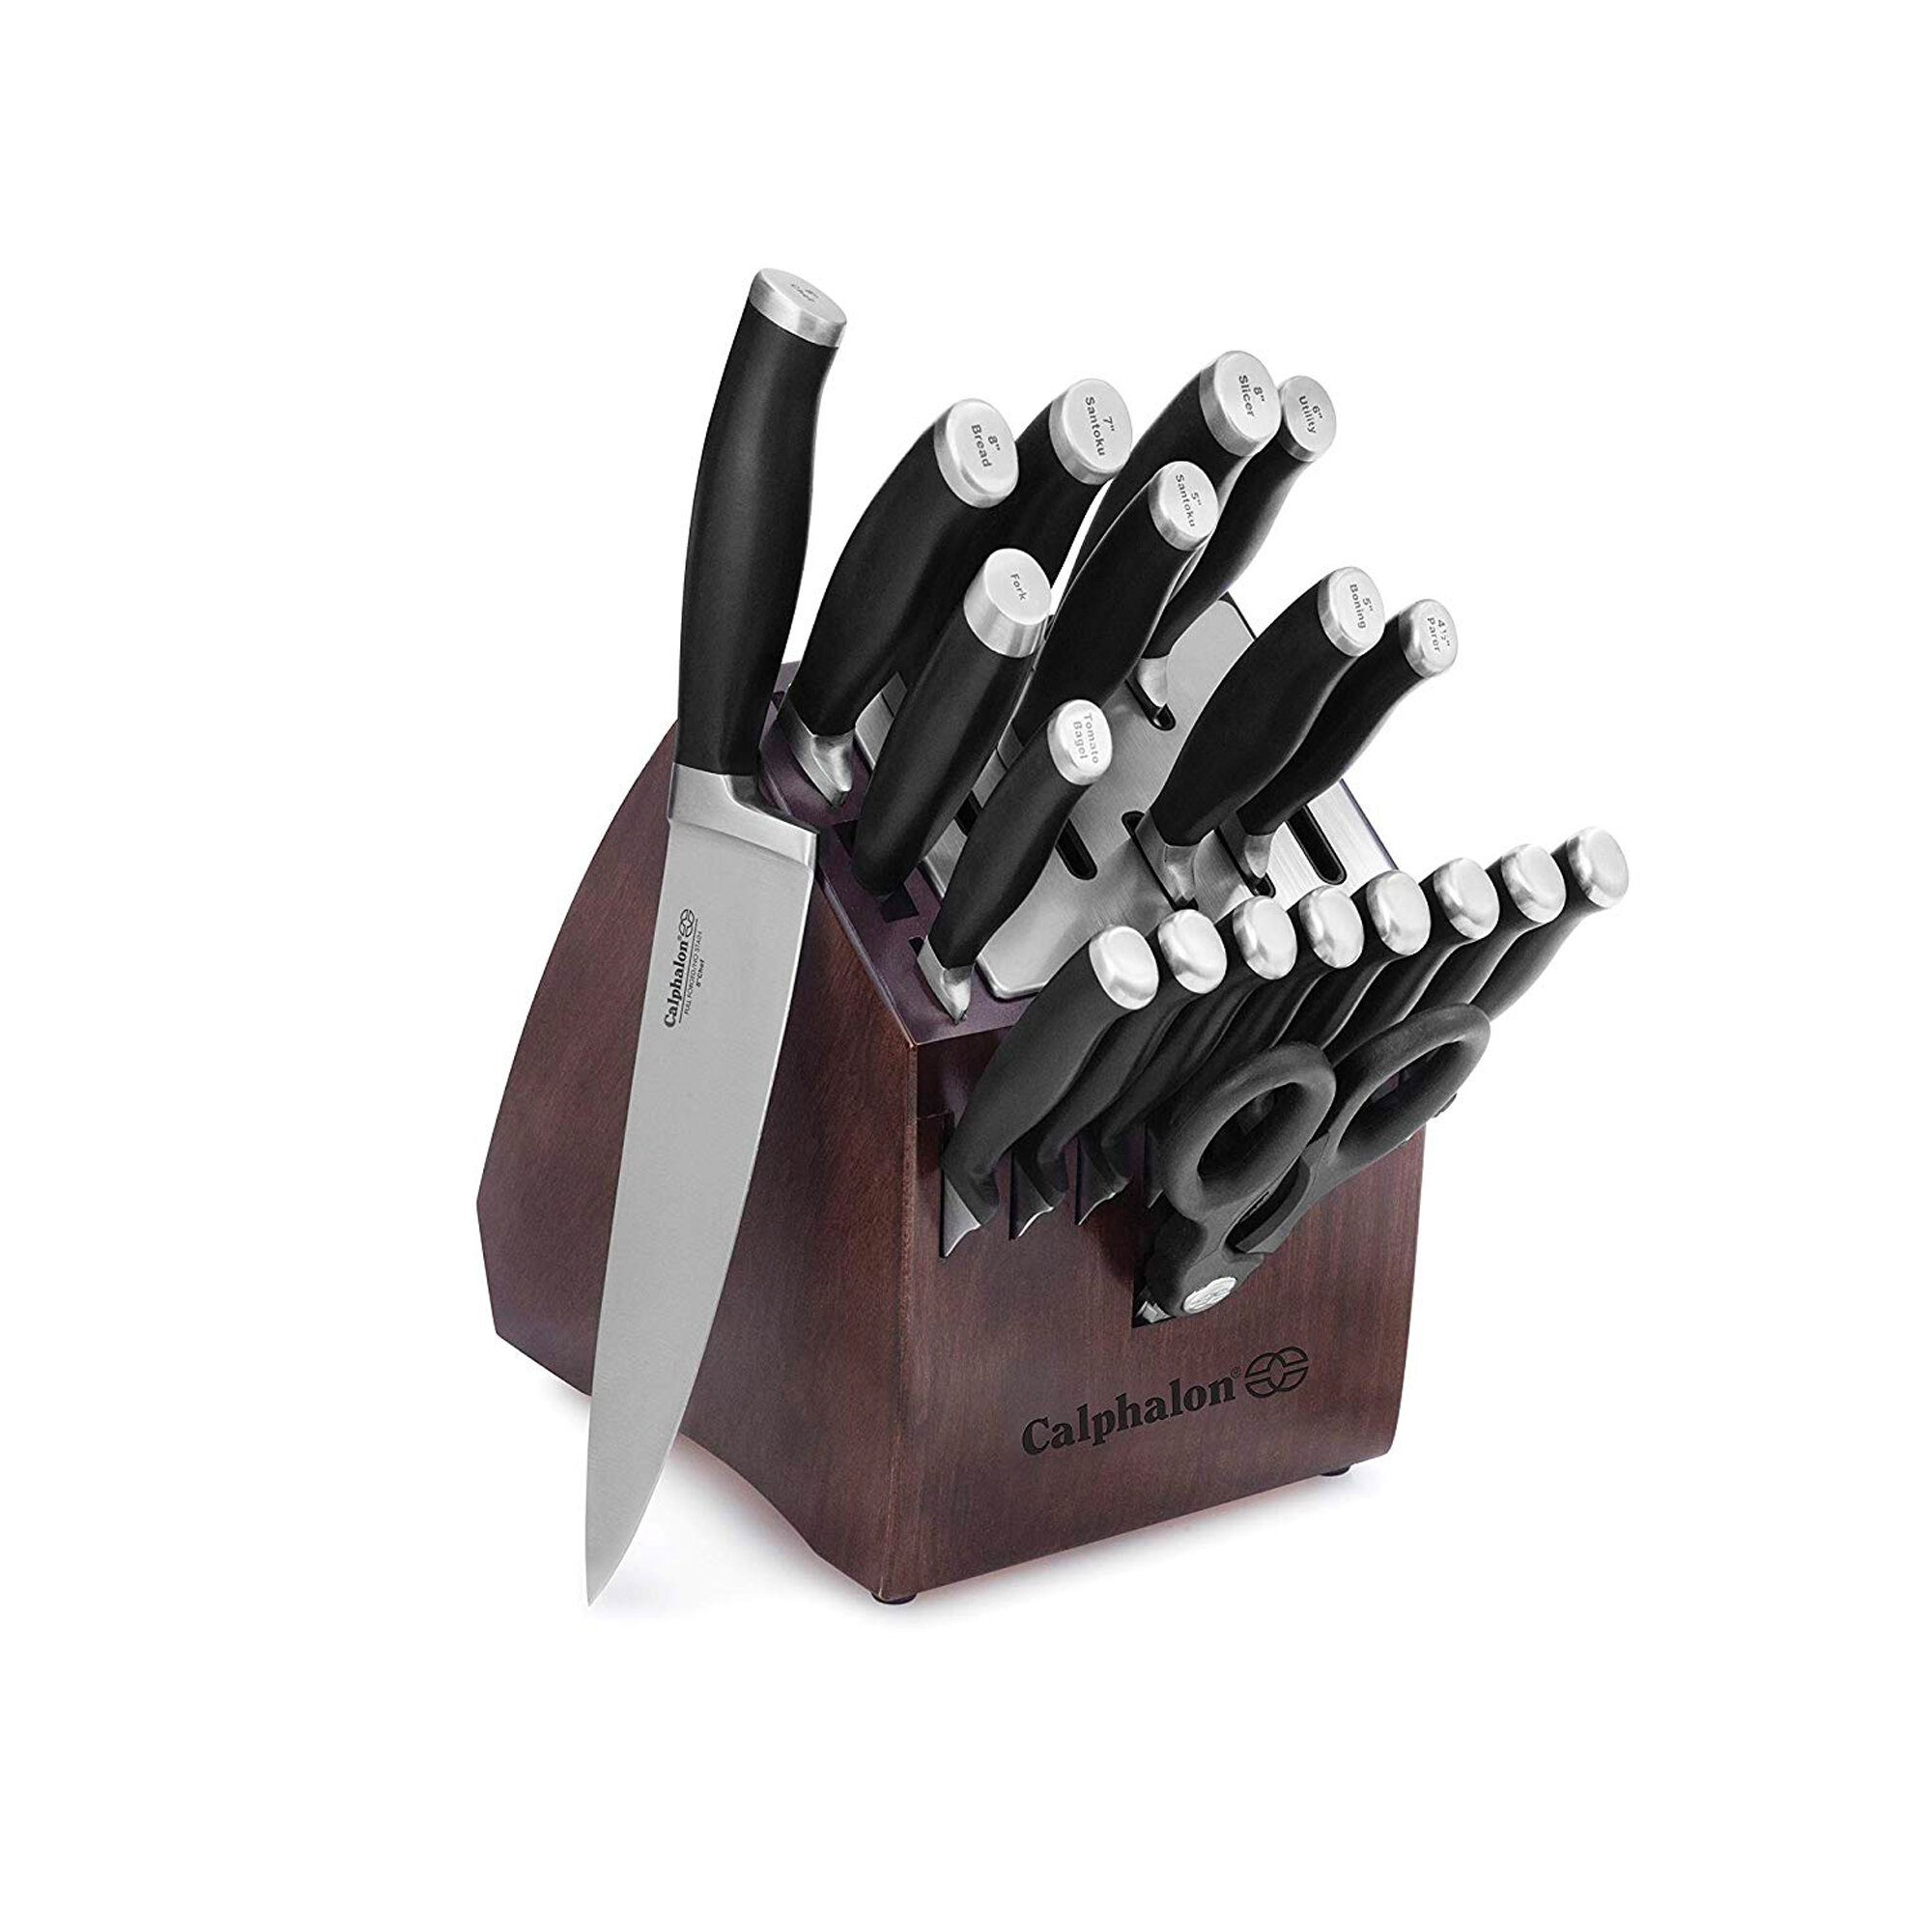 self sharpening knife block pros and cons